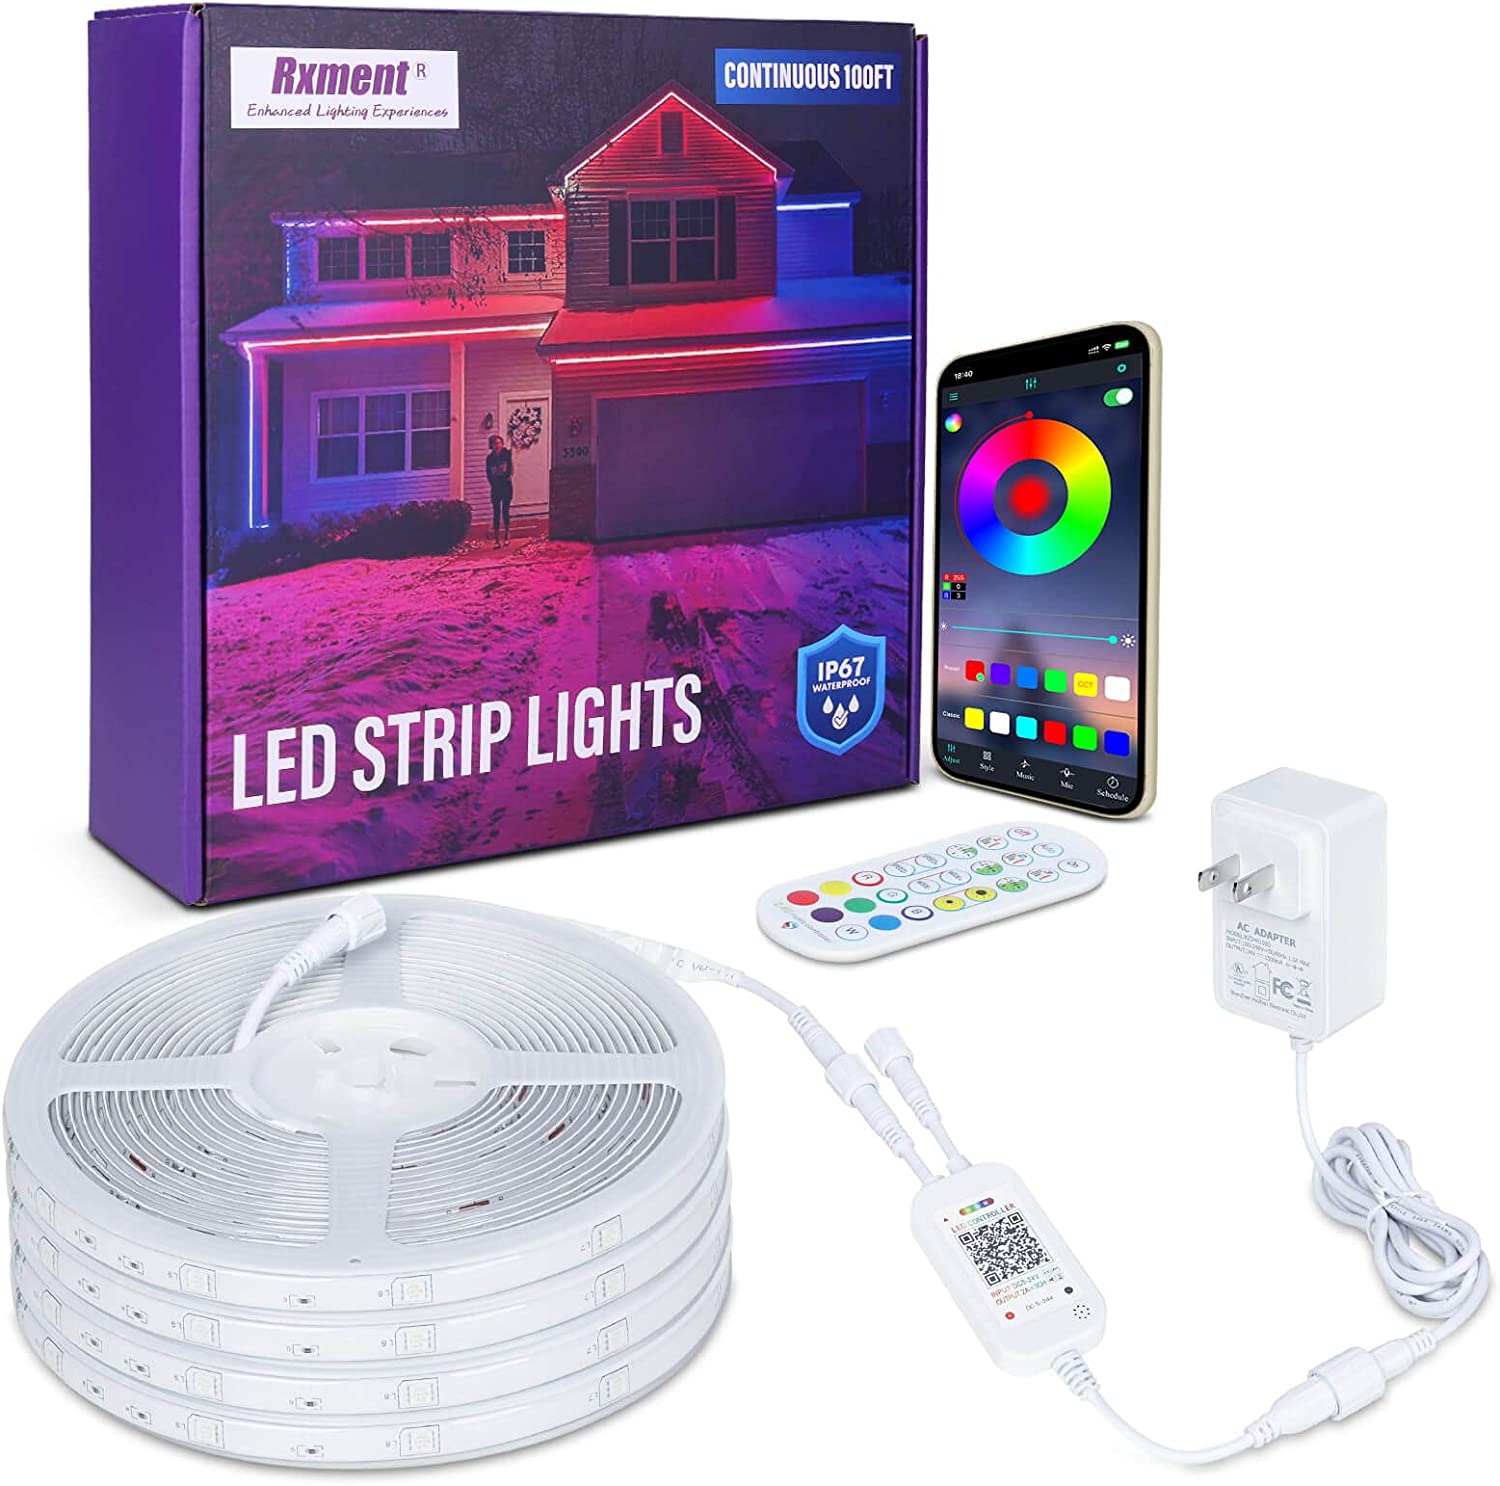 Rxment 100ft Continuous Outdoor Led Strip Lights Waterproof with RF Remote & Bluetooth Music Sync App Control, Long Color Changing LED Rope Lights,5050 RGB Super Bright Outside Led Lights, IP67,24V